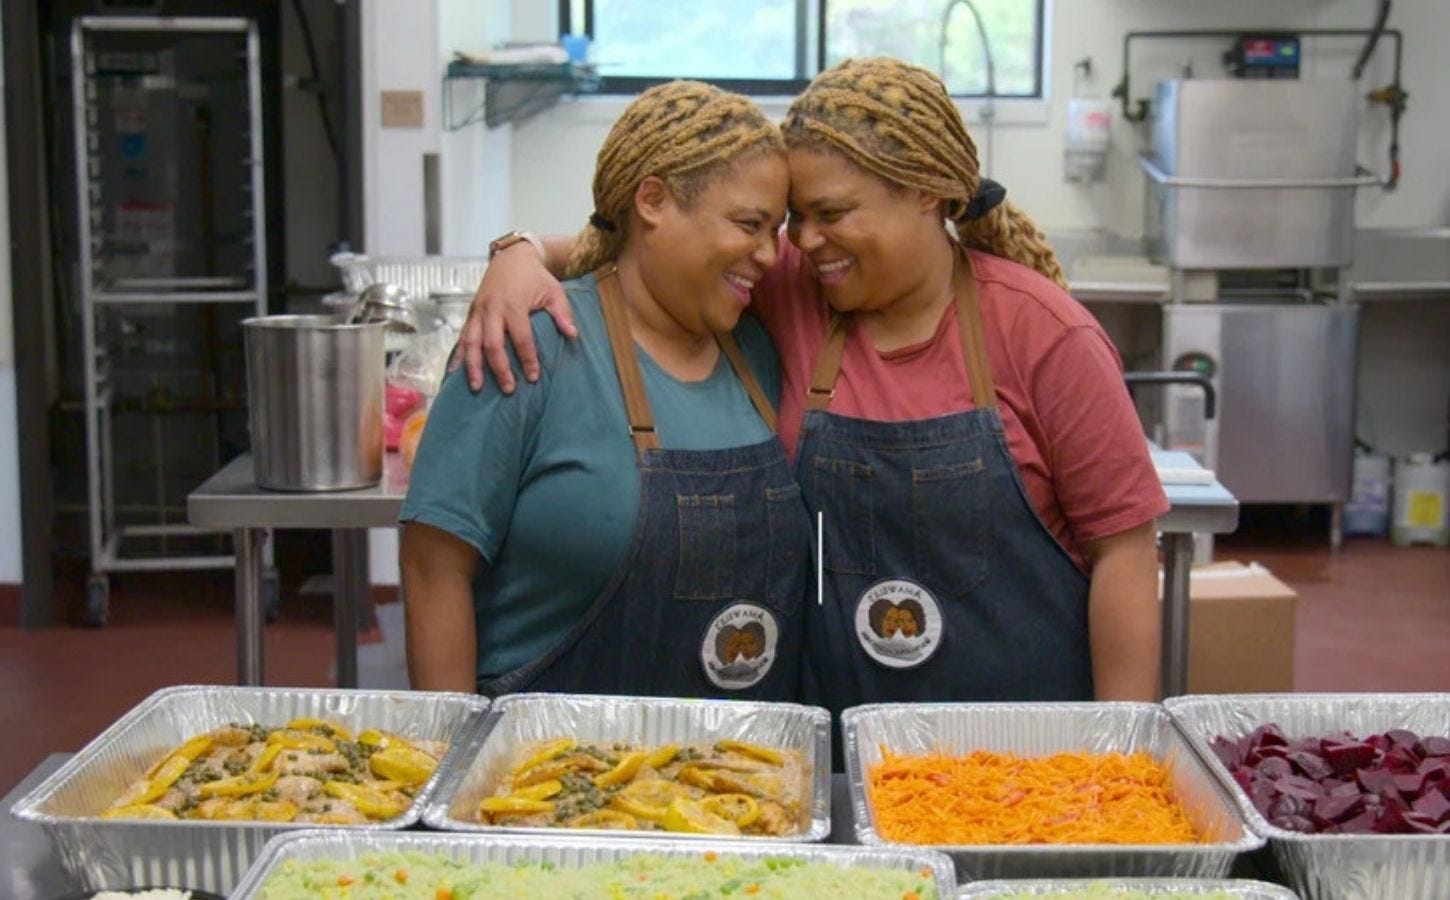 Netflix Documentary Tracking Identical Twins Inspires People To Go Vegan - Plant Based News